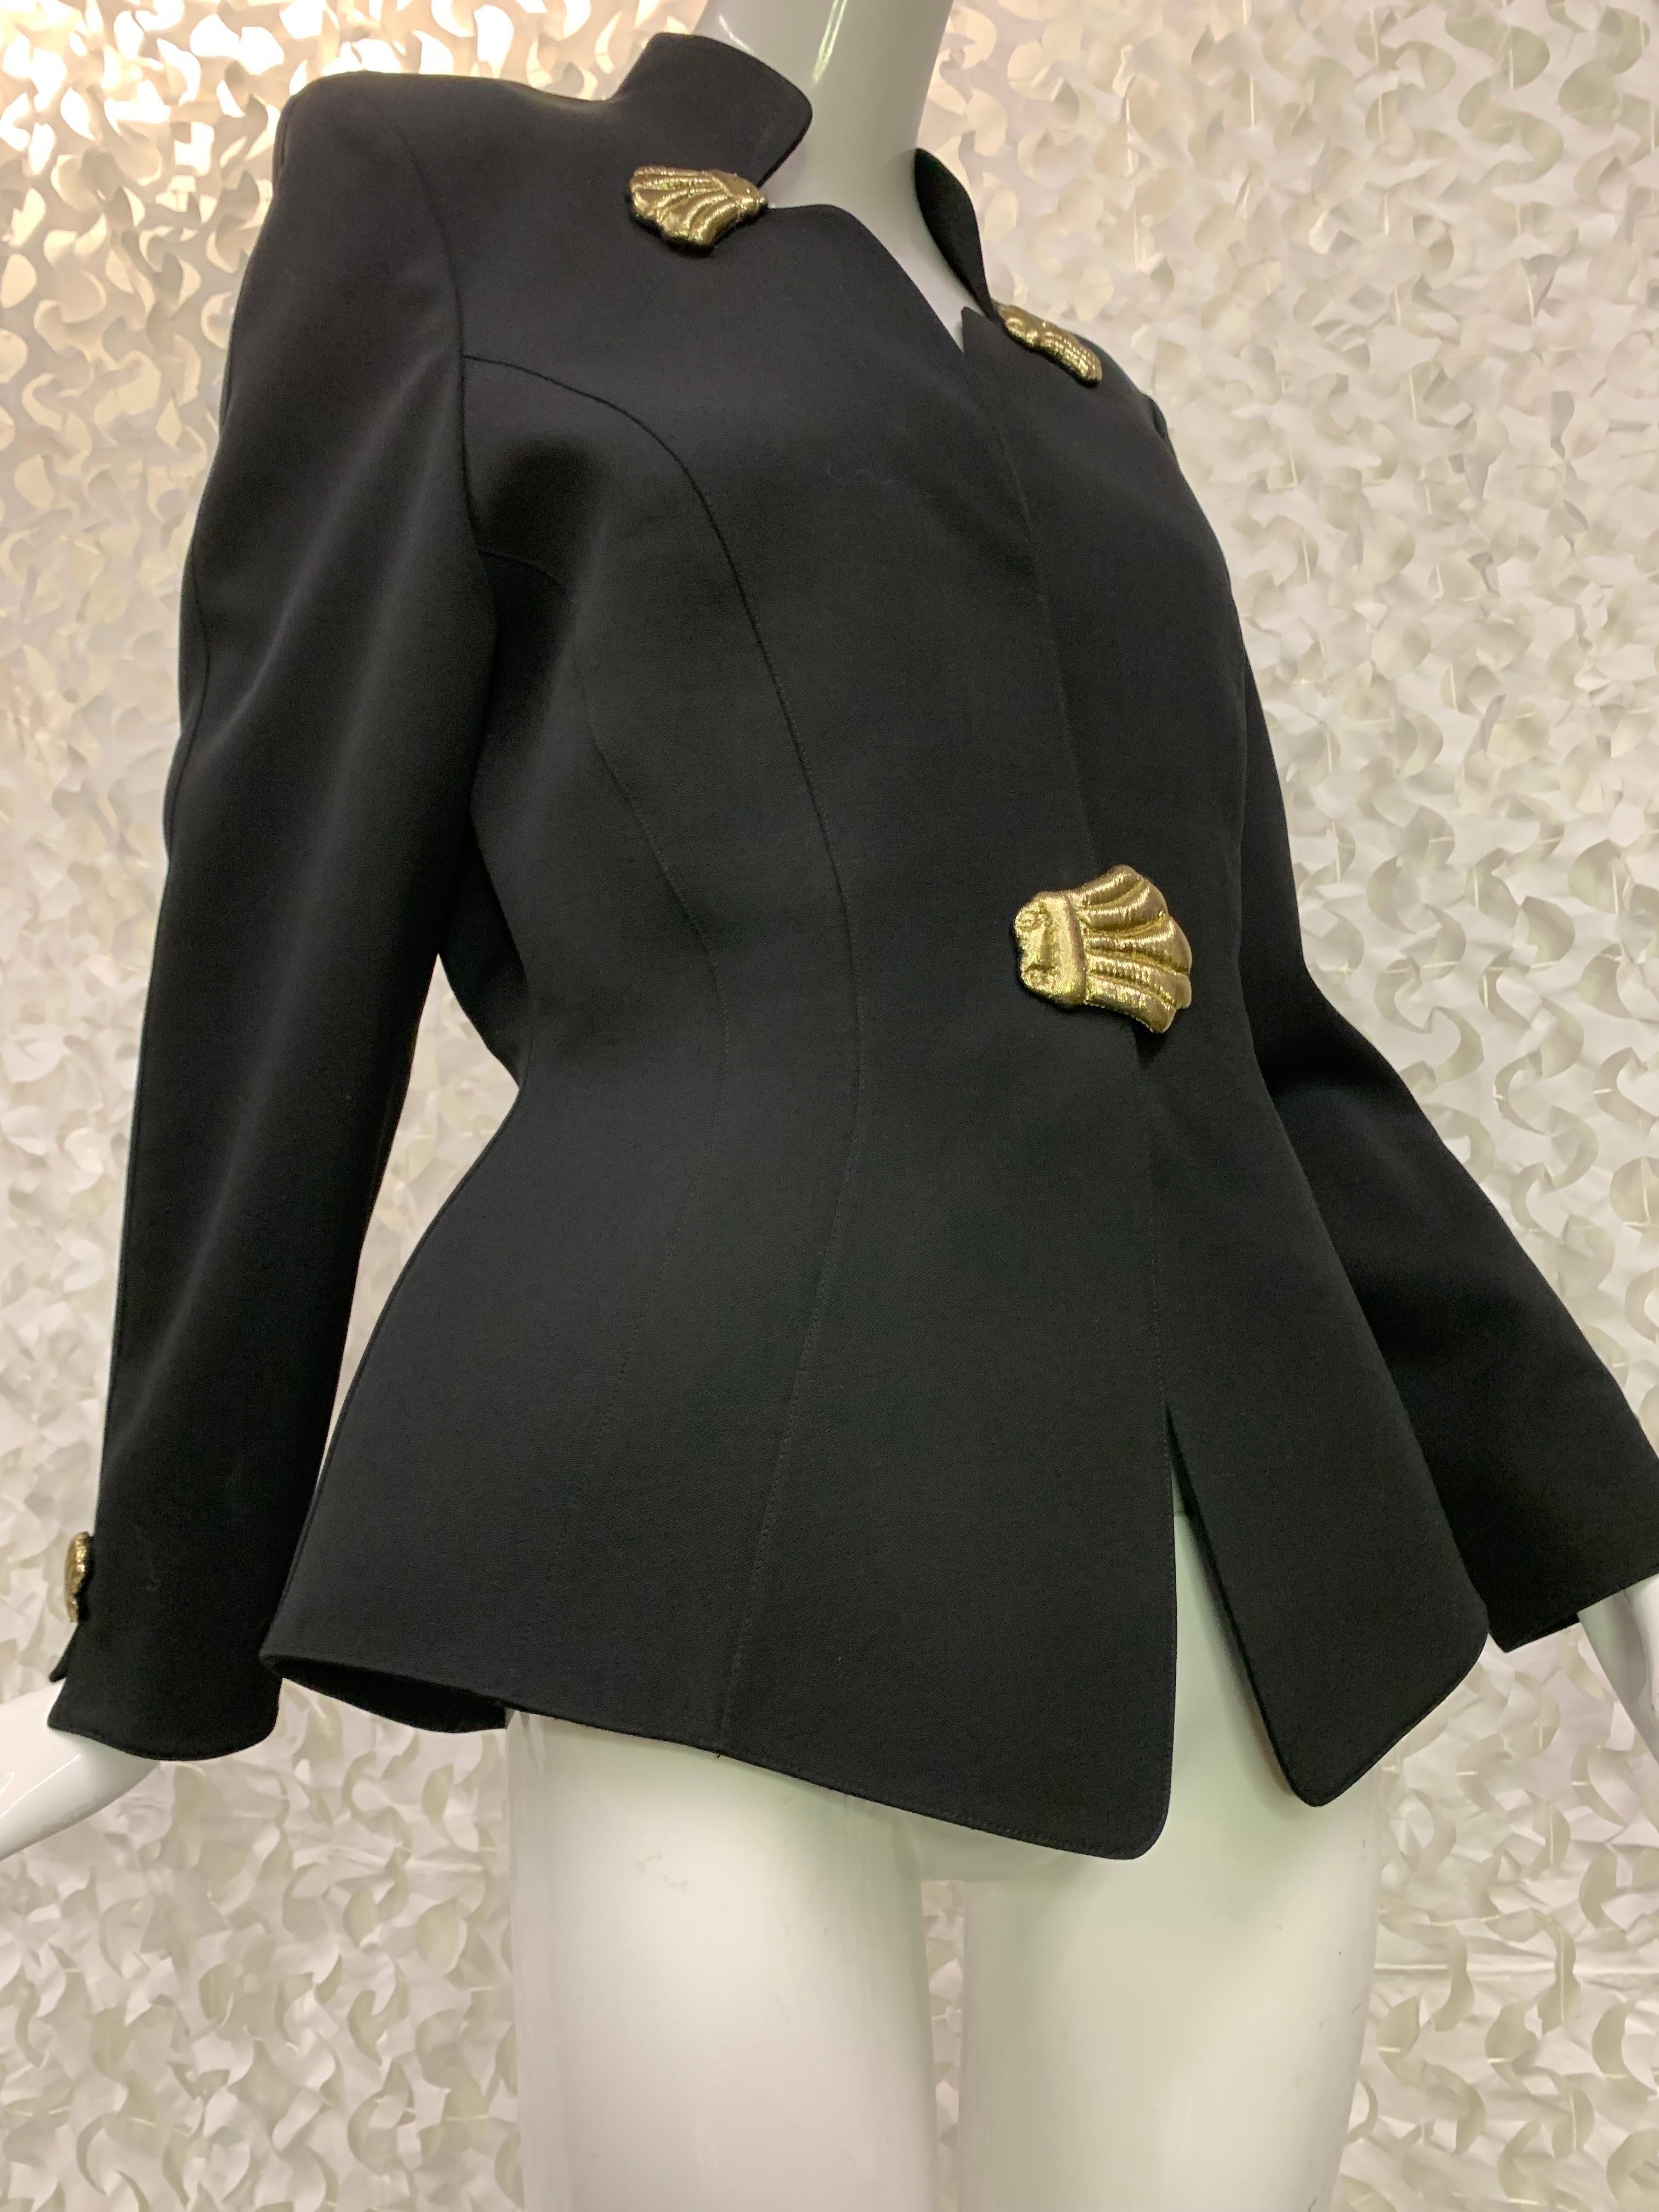 1990s Thierry Mugler Black Wool Crepe Jacket w Gold Lame Fabric Shell Details  7